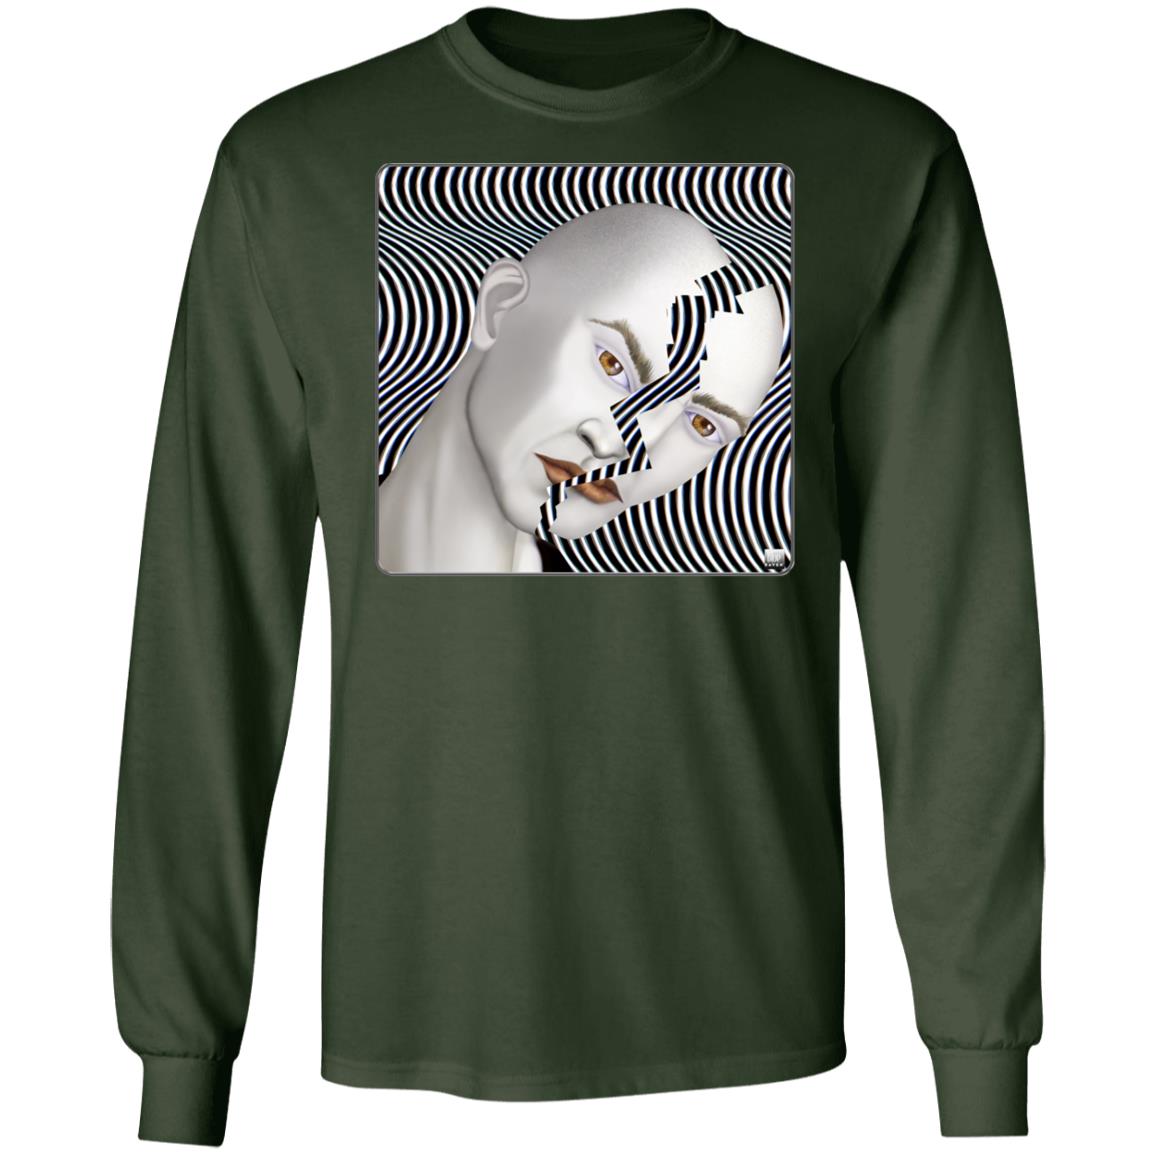 Cracked Until Coffee - Men's Long Sleeve T-Shirt